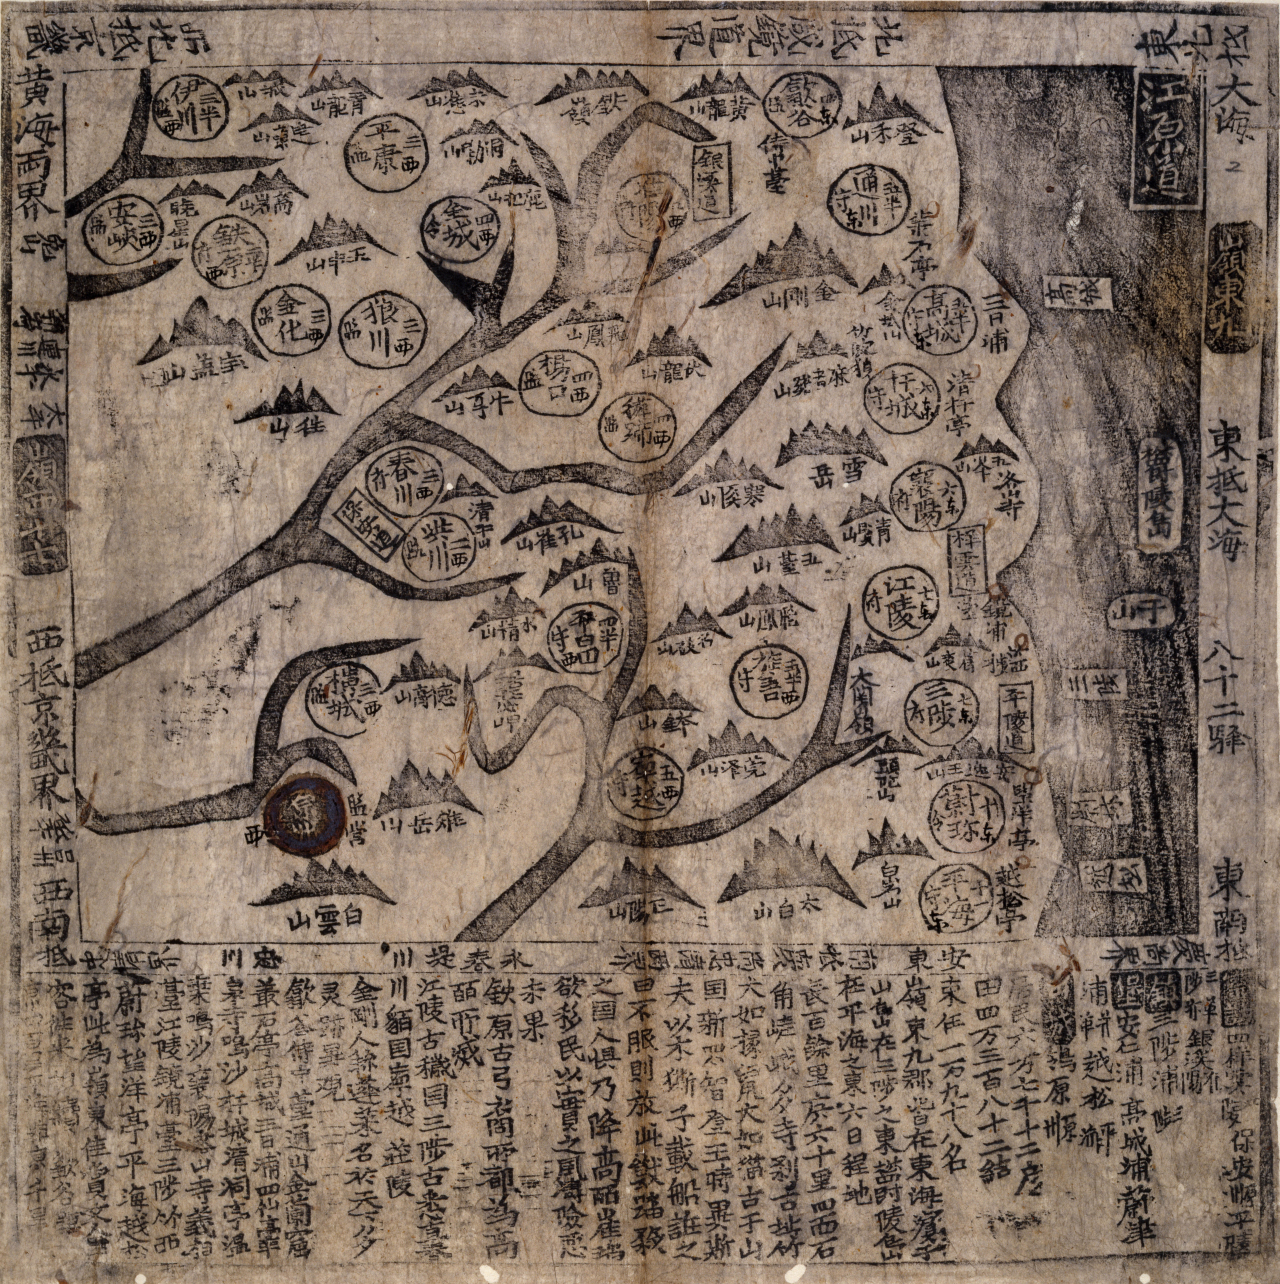 An old map of Gangwon Province in Korea published in 1592 (Seoul National University)